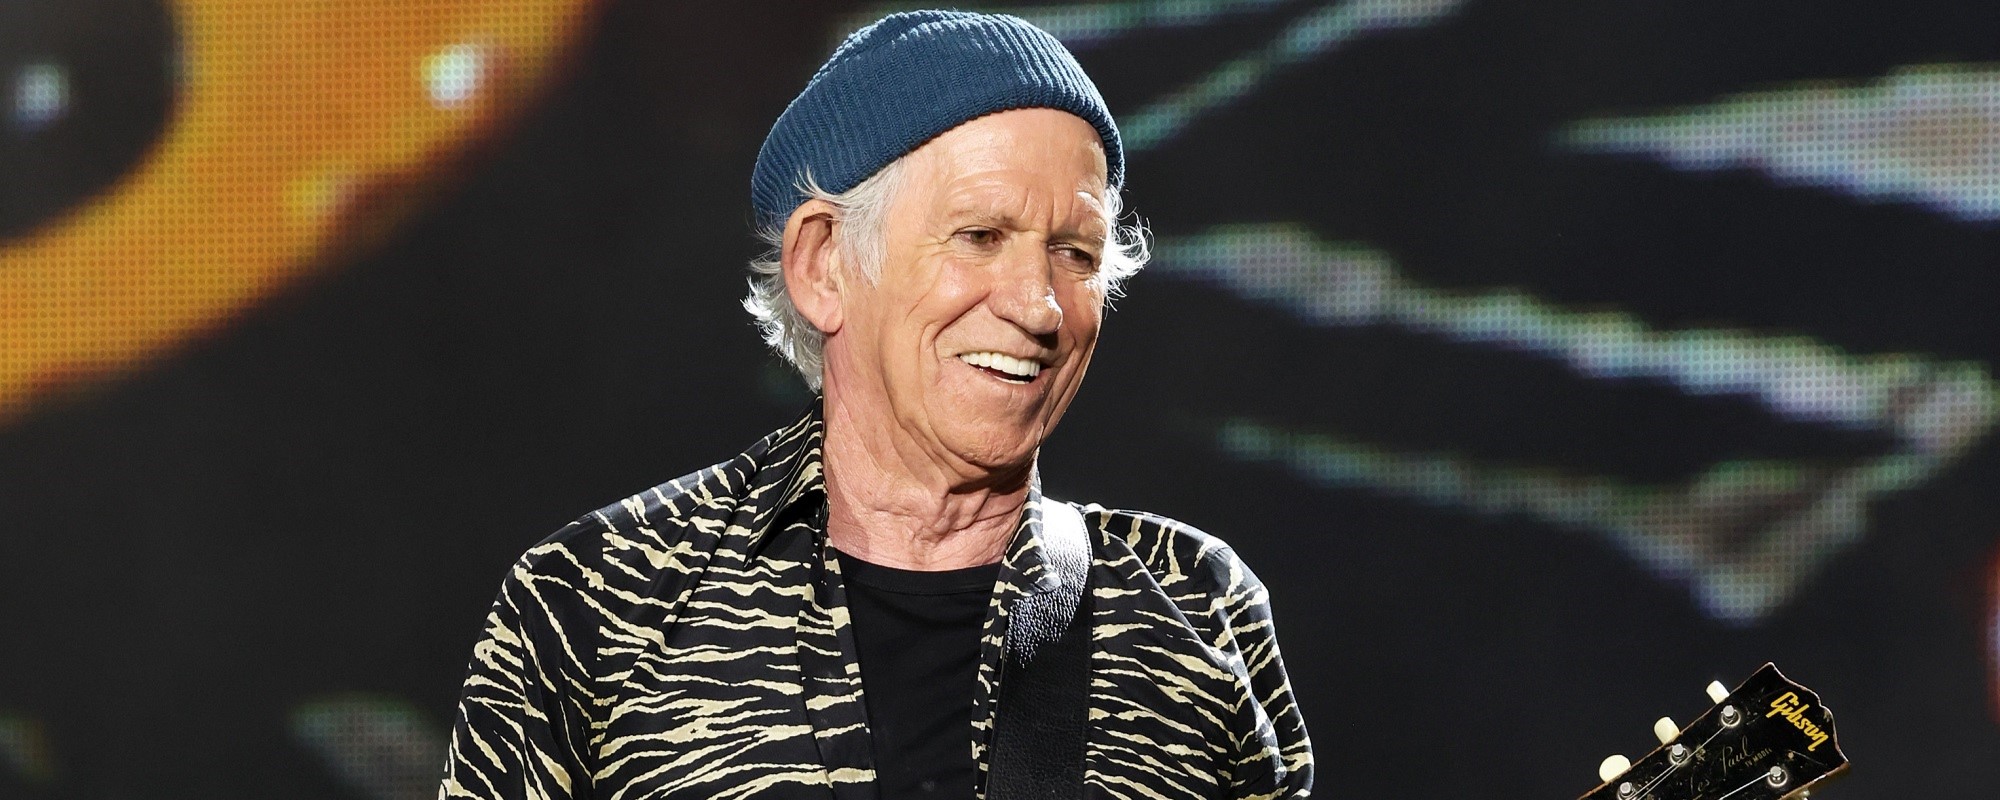 Watch Keith Richards Sing New Rolling Stones Songs Live for the First Time Ever